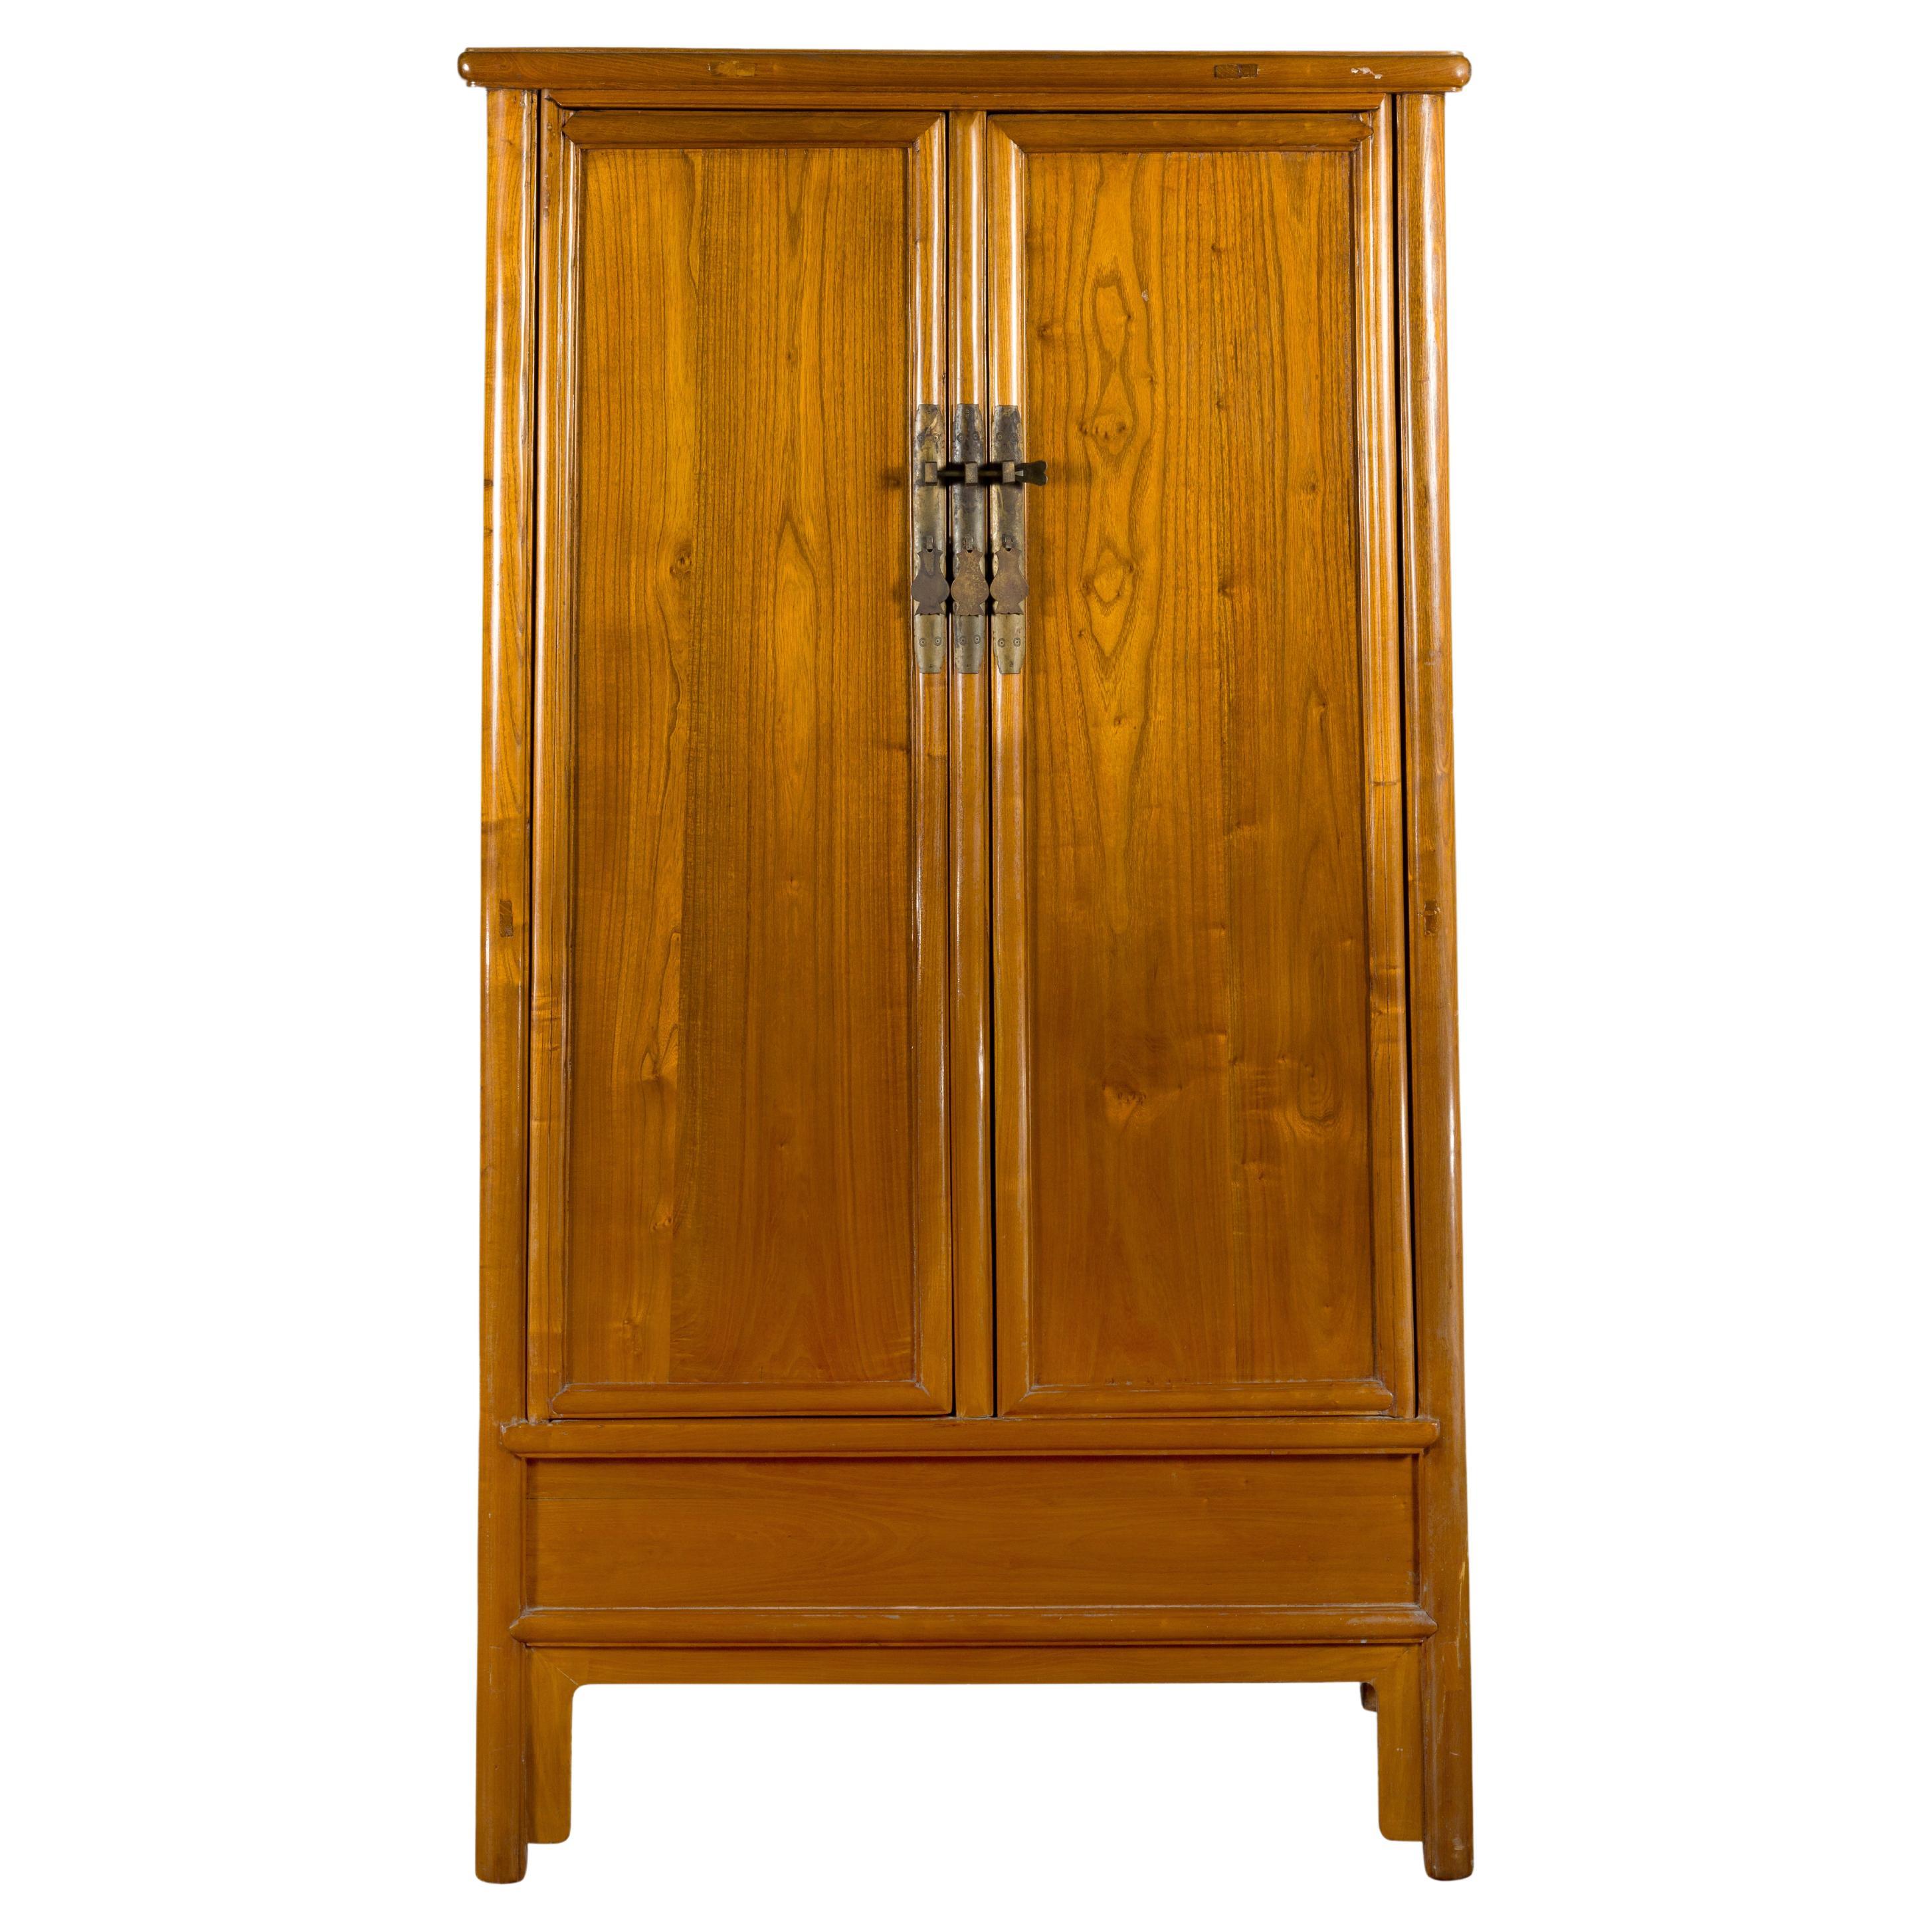 Chinese Qing Dynasty 19th Century Elmwood Noodle Cabinet with Hidden Drawers For Sale